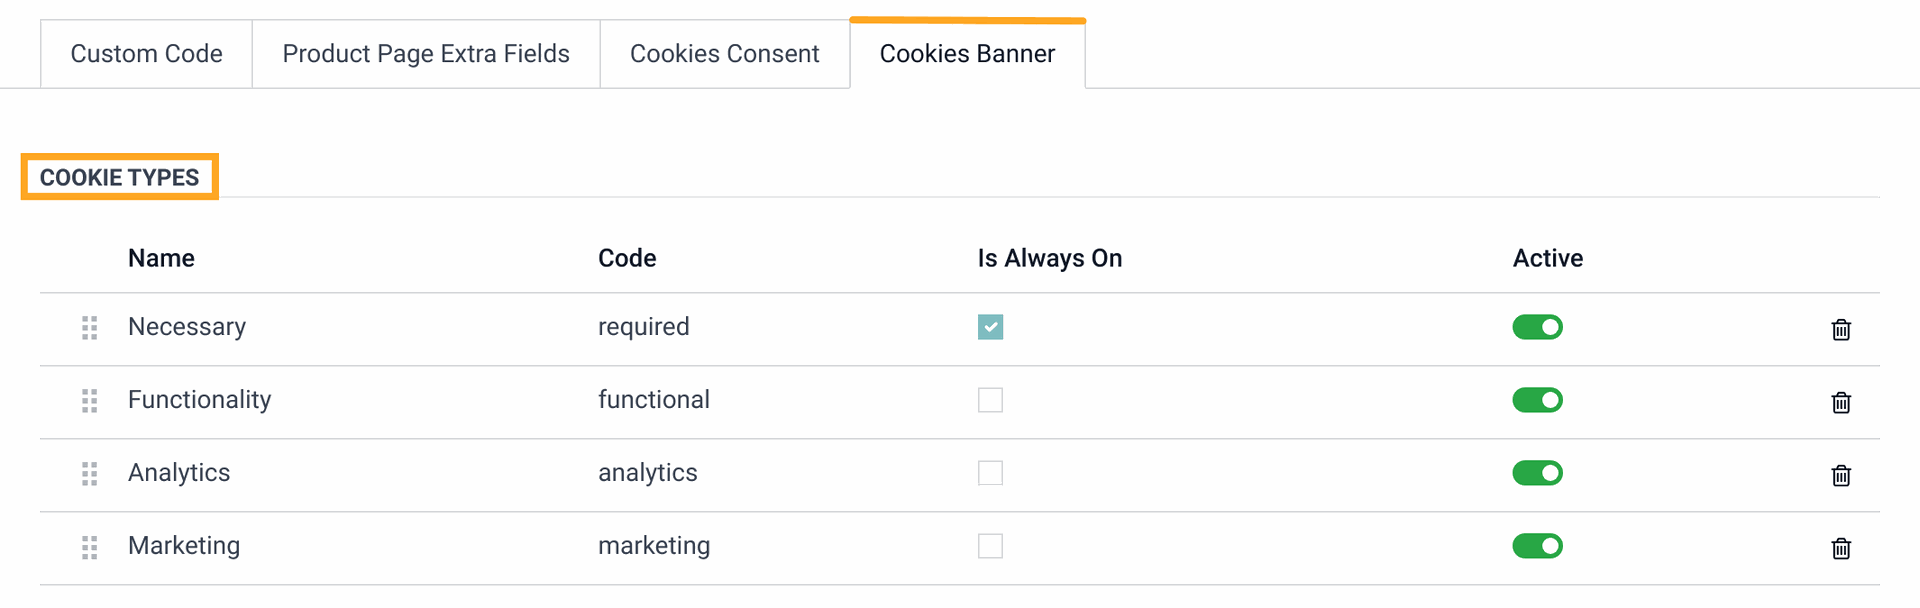 Odoo 17.0 Cookies Banner setting with cookie types